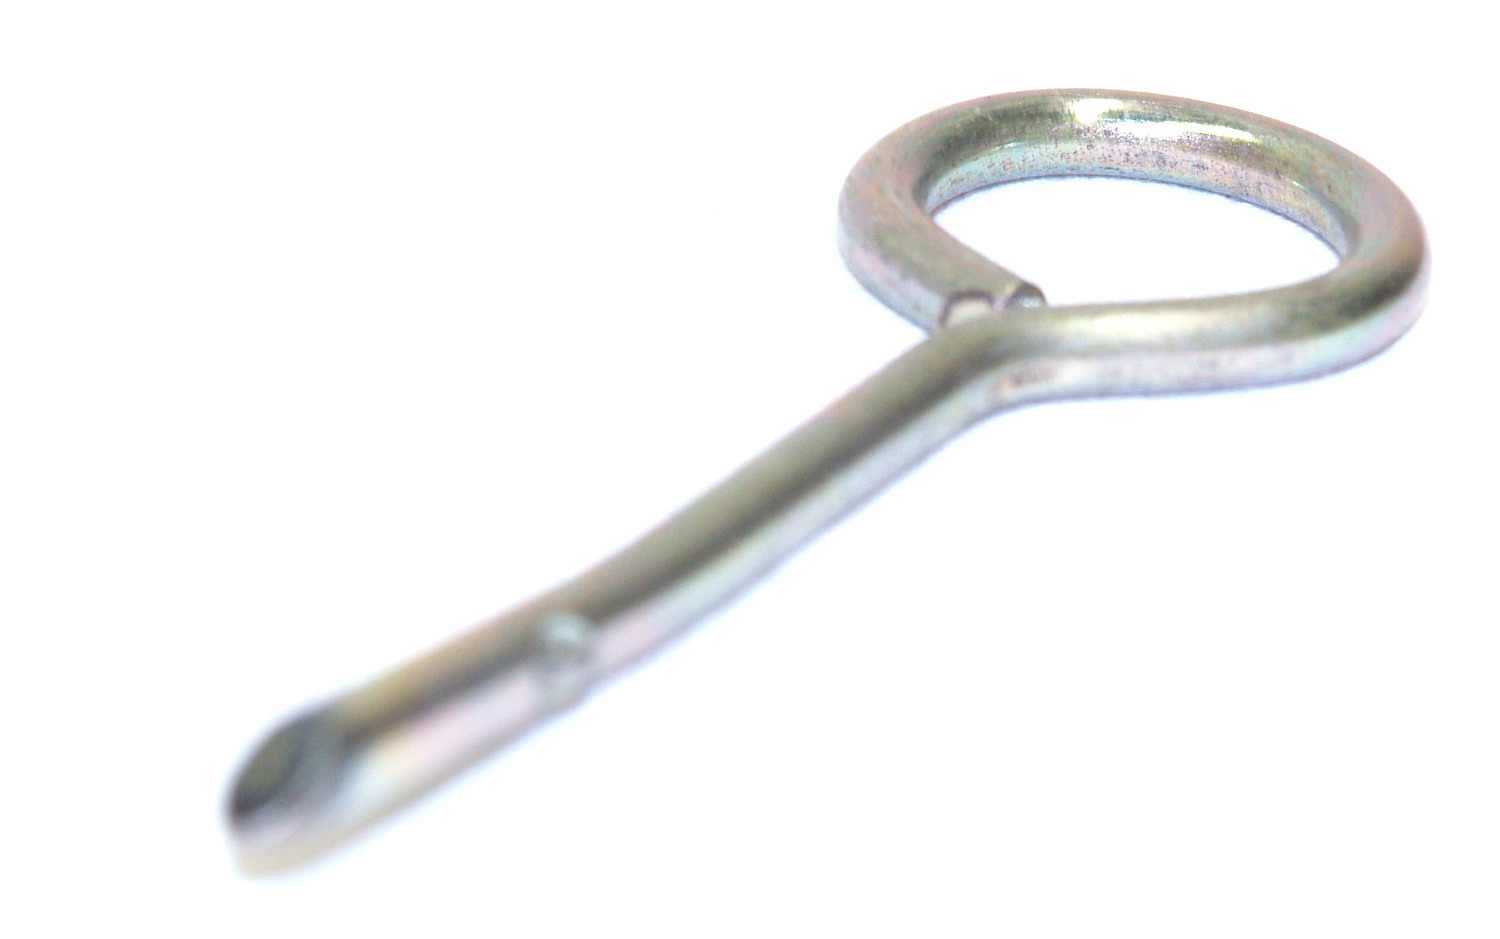 T-Nut key for drain cleaning cables and tools